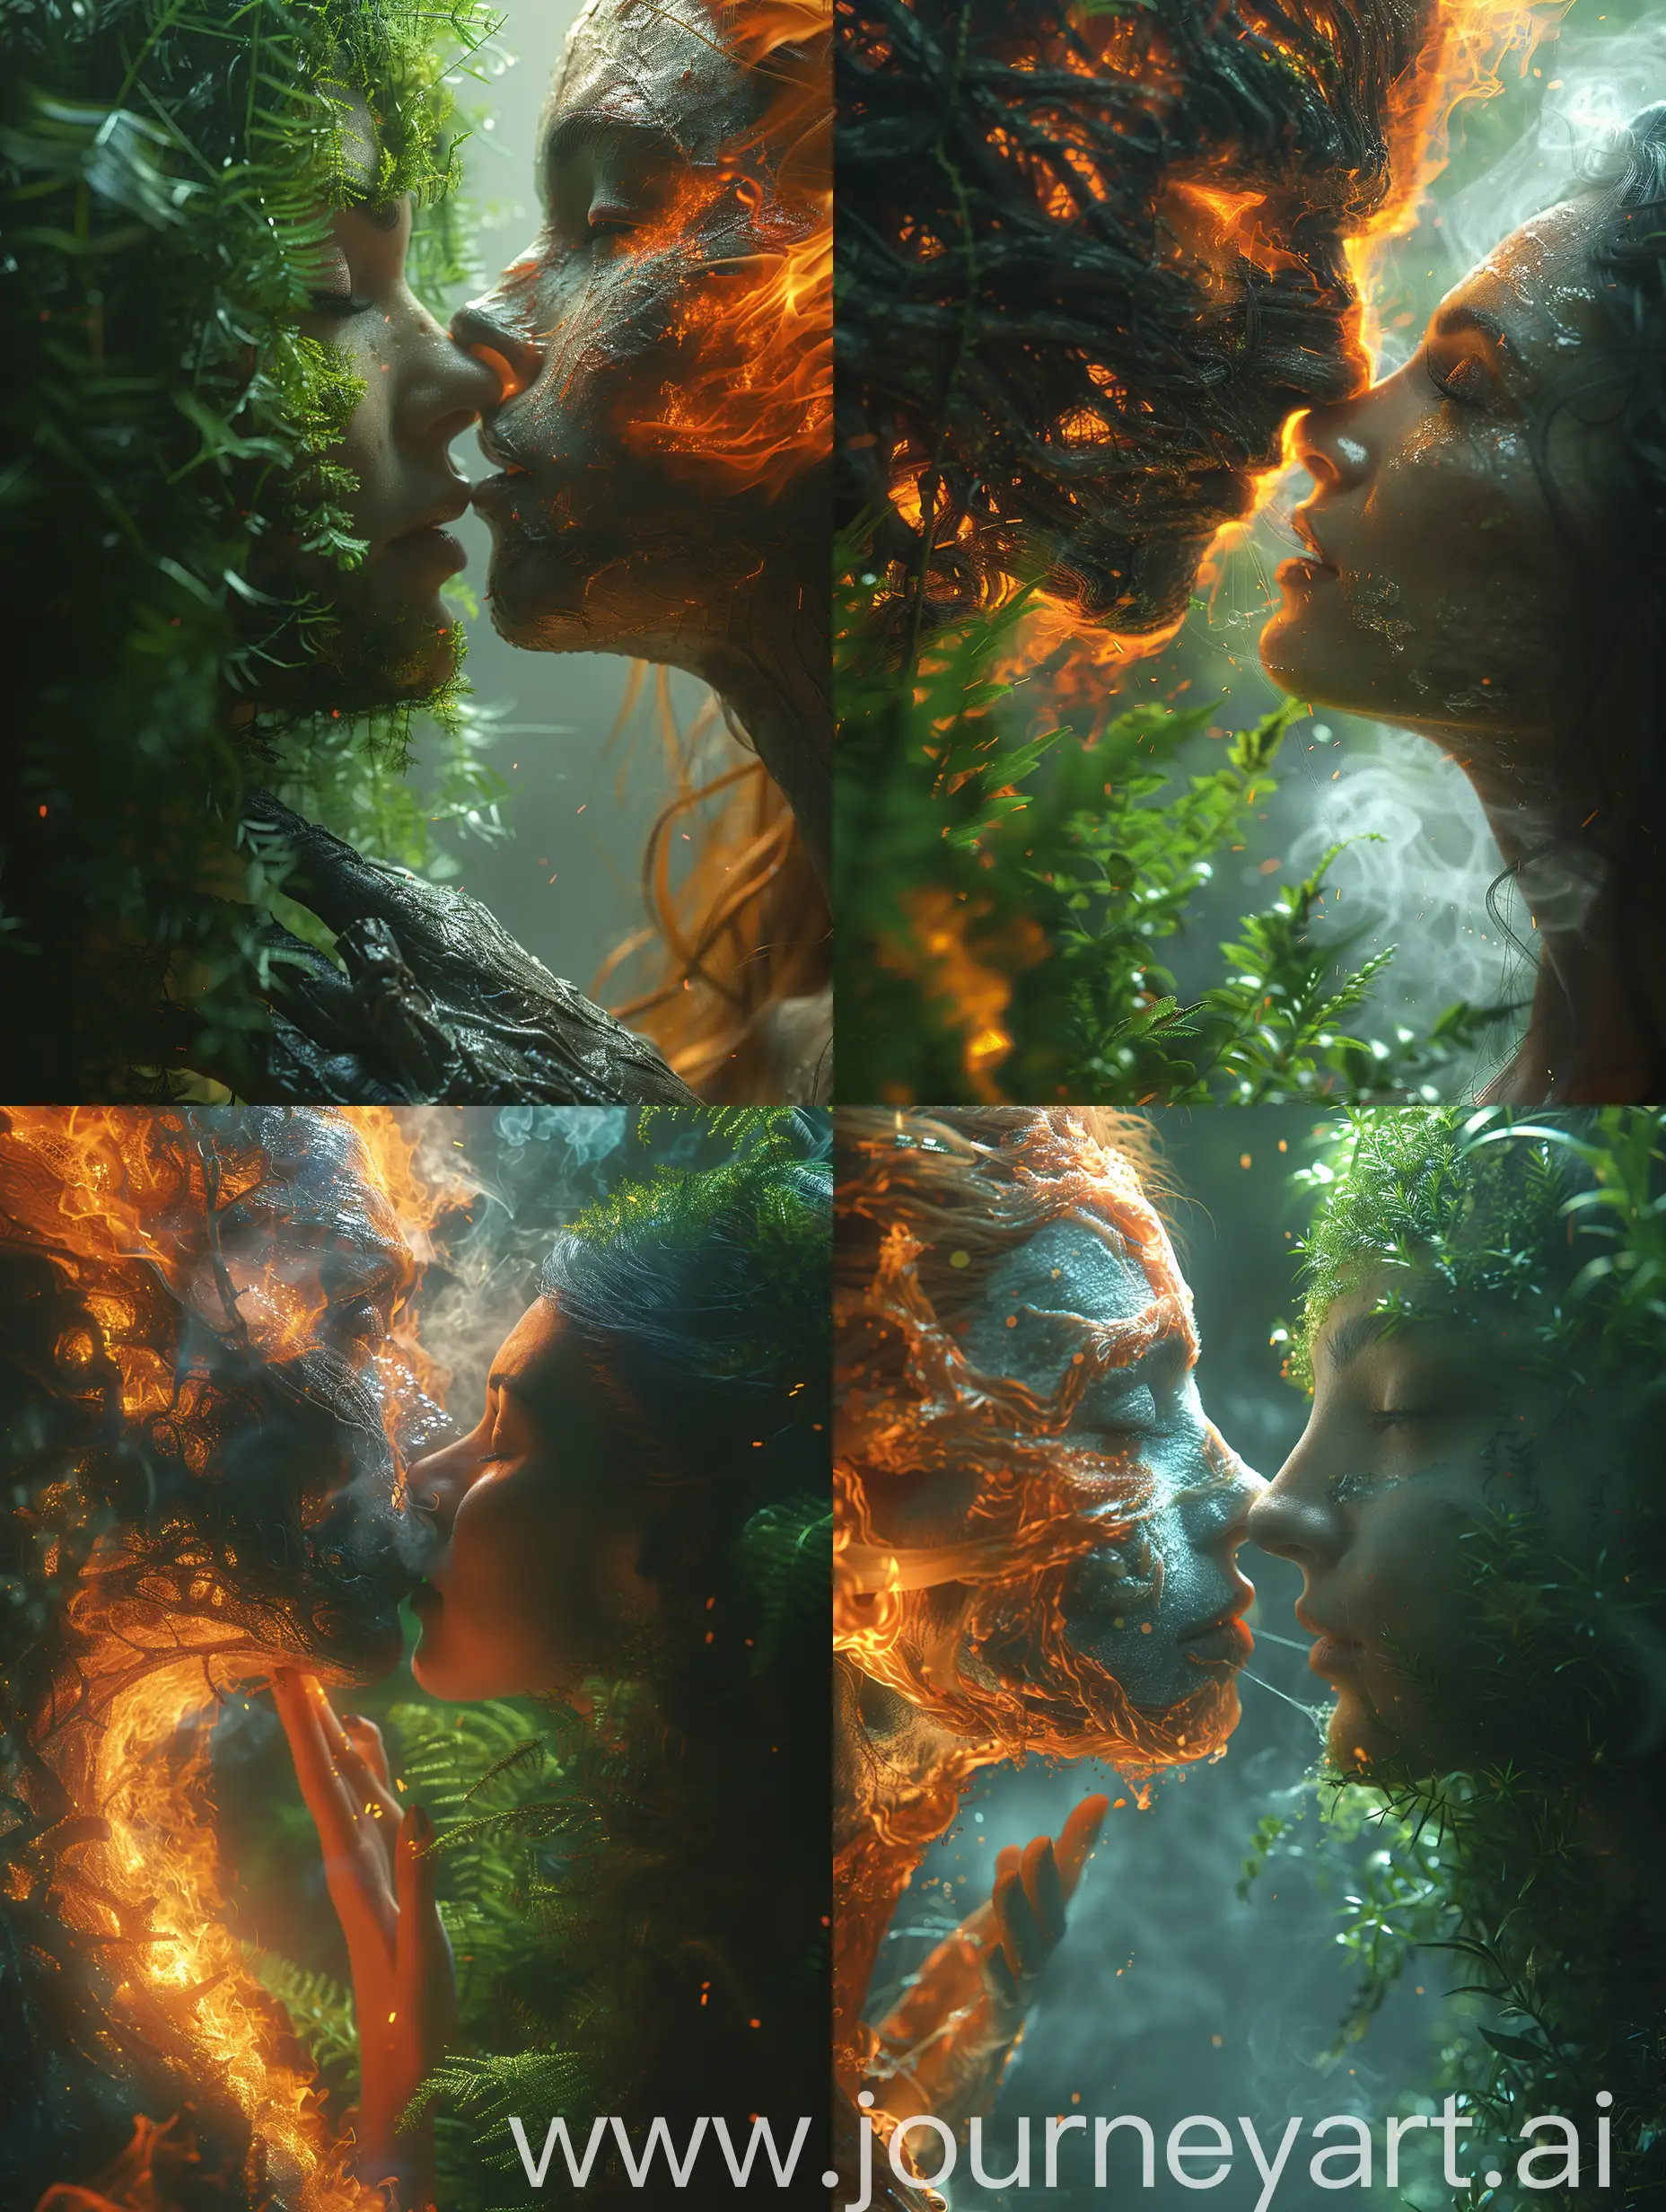 a fire elemental kissing a wood elemental, the green plants wood elemental slowly turns to ash, woman burning spreading from fingers, destruction, darkness creeping over the elemental's face, burning away, Karol Bak and Carne Griffiths Epic cinematic brilliant stunning intricate meticulously detailed dramatic atmospheric maximalist digital matte painting Arnold Böcklin, Ivan Shishkin, Gustave Doré --stylise 750